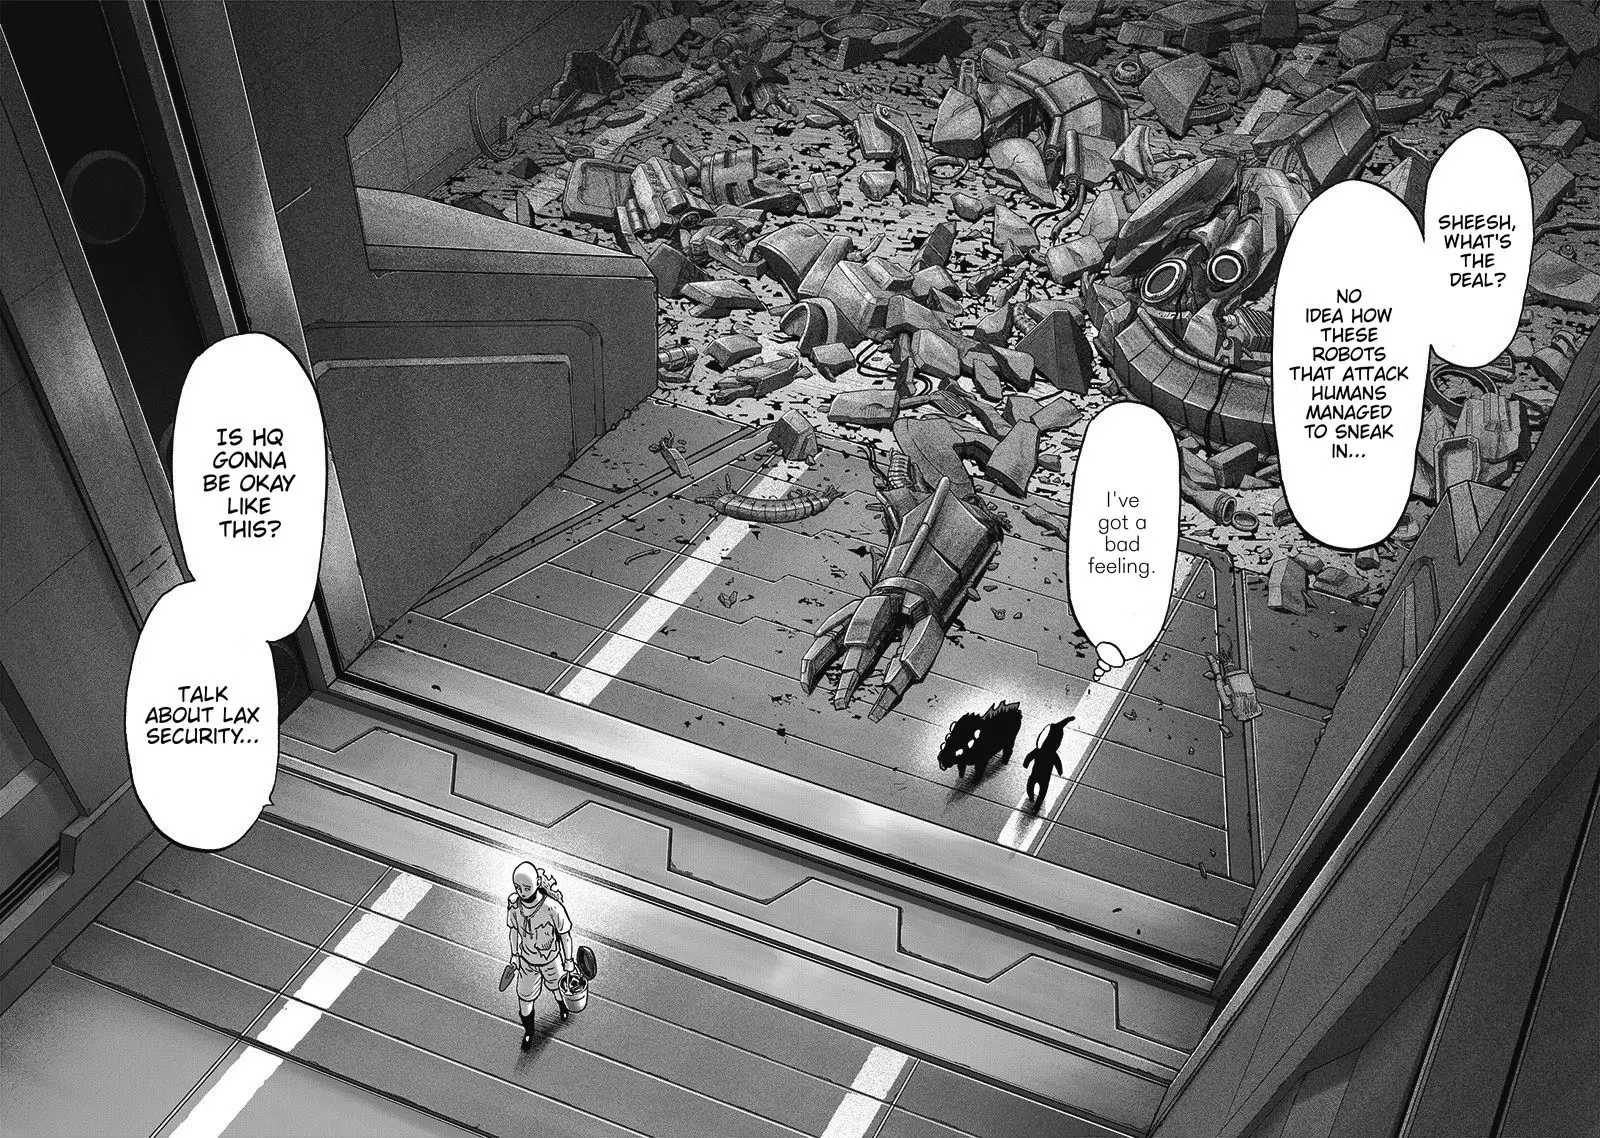 One Punch Man Chapter 172, READ One Punch Man Chapter 172 ONLINE, lost in the cloud genre,lost in the cloud gif,lost in the cloud girl,lost in the cloud goods,lost in the cloud goodreads,lost in the cloud,lost ark cloud gaming,lost odyssey cloud gaming,lost in the cloud fanart,lost in the cloud fanfic,lost in the cloud fandom,lost in the cloud first kiss,lost in the cloud font,lost in the cloud ending,lost in the cloud episode 97,lost in the cloud edit,lost in the cloud explained,lost in the cloud dog,lost in the cloud discord server,lost in the cloud desktop wallpaper,lost in the cloud drawing,can't find my cloud on network,lost in the cloud characters,lost in the cloud chapter 93 release date,lost in the cloud birthday,lost in the cloud birthday art,lost in the cloud background,lost in the cloud banner,lost in the clouds meaning,what is the black cloud in lost,lost in the cloud ao3,lost in the cloud anime,lost in the cloud art,lost in the cloud author twitter,lost in the cloud author instagram,lost in the cloud artist,lost in the cloud acrylic stand,lost in the cloud artist twitter,lost in the cloud art style,lost in the cloud analysis